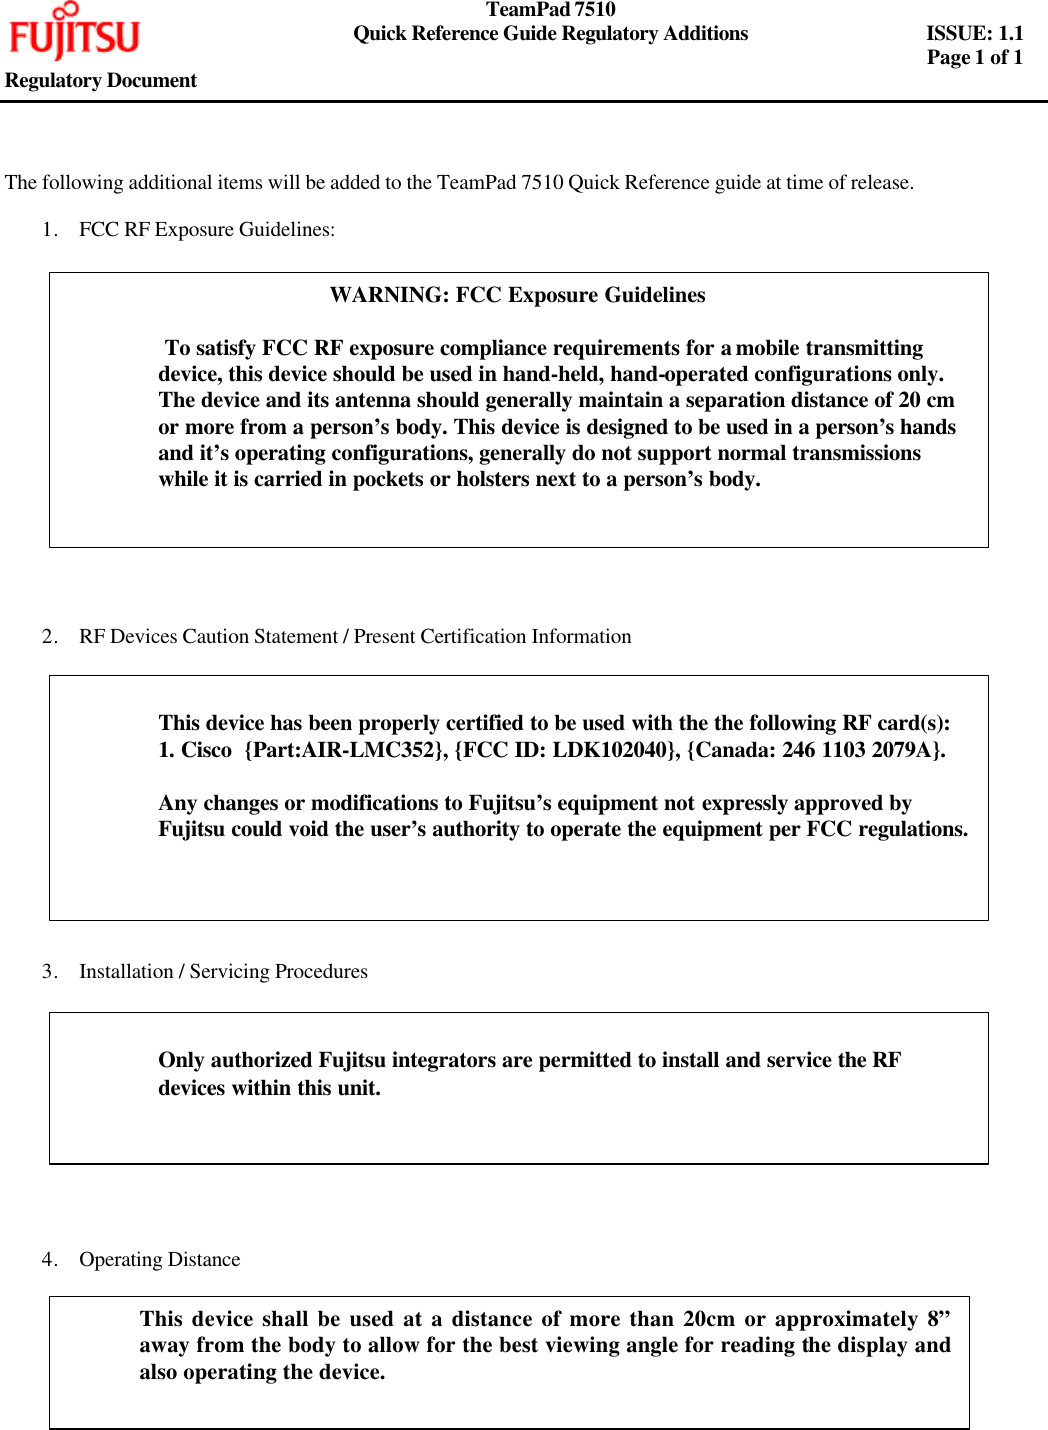     TeamPad 7510       Quick Reference Guide Regulatory Additions   ISSUE: 1.1        Page 1 of 1   Regulatory Document     The following additional items will be added to the TeamPad 7510 Quick Reference guide at time of release.  1. FCC RF Exposure Guidelines:                  2. RF Devices Caution Statement / Present Certification Information              3. Installation / Servicing Procedures             4. Operating Distance    WARNING: FCC Exposure Guidelines   To satisfy FCC RF exposure compliance requirements for a mobile transmitting device, this device should be used in hand-held, hand-operated configurations only. The device and its antenna should generally maintain a separation distance of 20 cm or more from a person’s body. This device is designed to be used in a person’s hands and it’s operating configurations, generally do not support normal transmissions while it is carried in pockets or holsters next to a person’s body.   This device has been properly certified to be used with the the following RF card(s): 1. Cisco  {Part:AIR-LMC352}, {FCC ID: LDK102040}, {Canada: 246 1103 2079A}.  Any changes or modifications to Fujitsu’s equipment not expressly approved by Fujitsu could void the user’s authority to operate the equipment per FCC regulations.  Only authorized Fujitsu integrators are permitted to install and service the RF devices within this unit.  This device shall be used at a distance of more than 20cm or approximately 8” away from the body to allow for the best viewing angle for reading the display and also operating the device.    